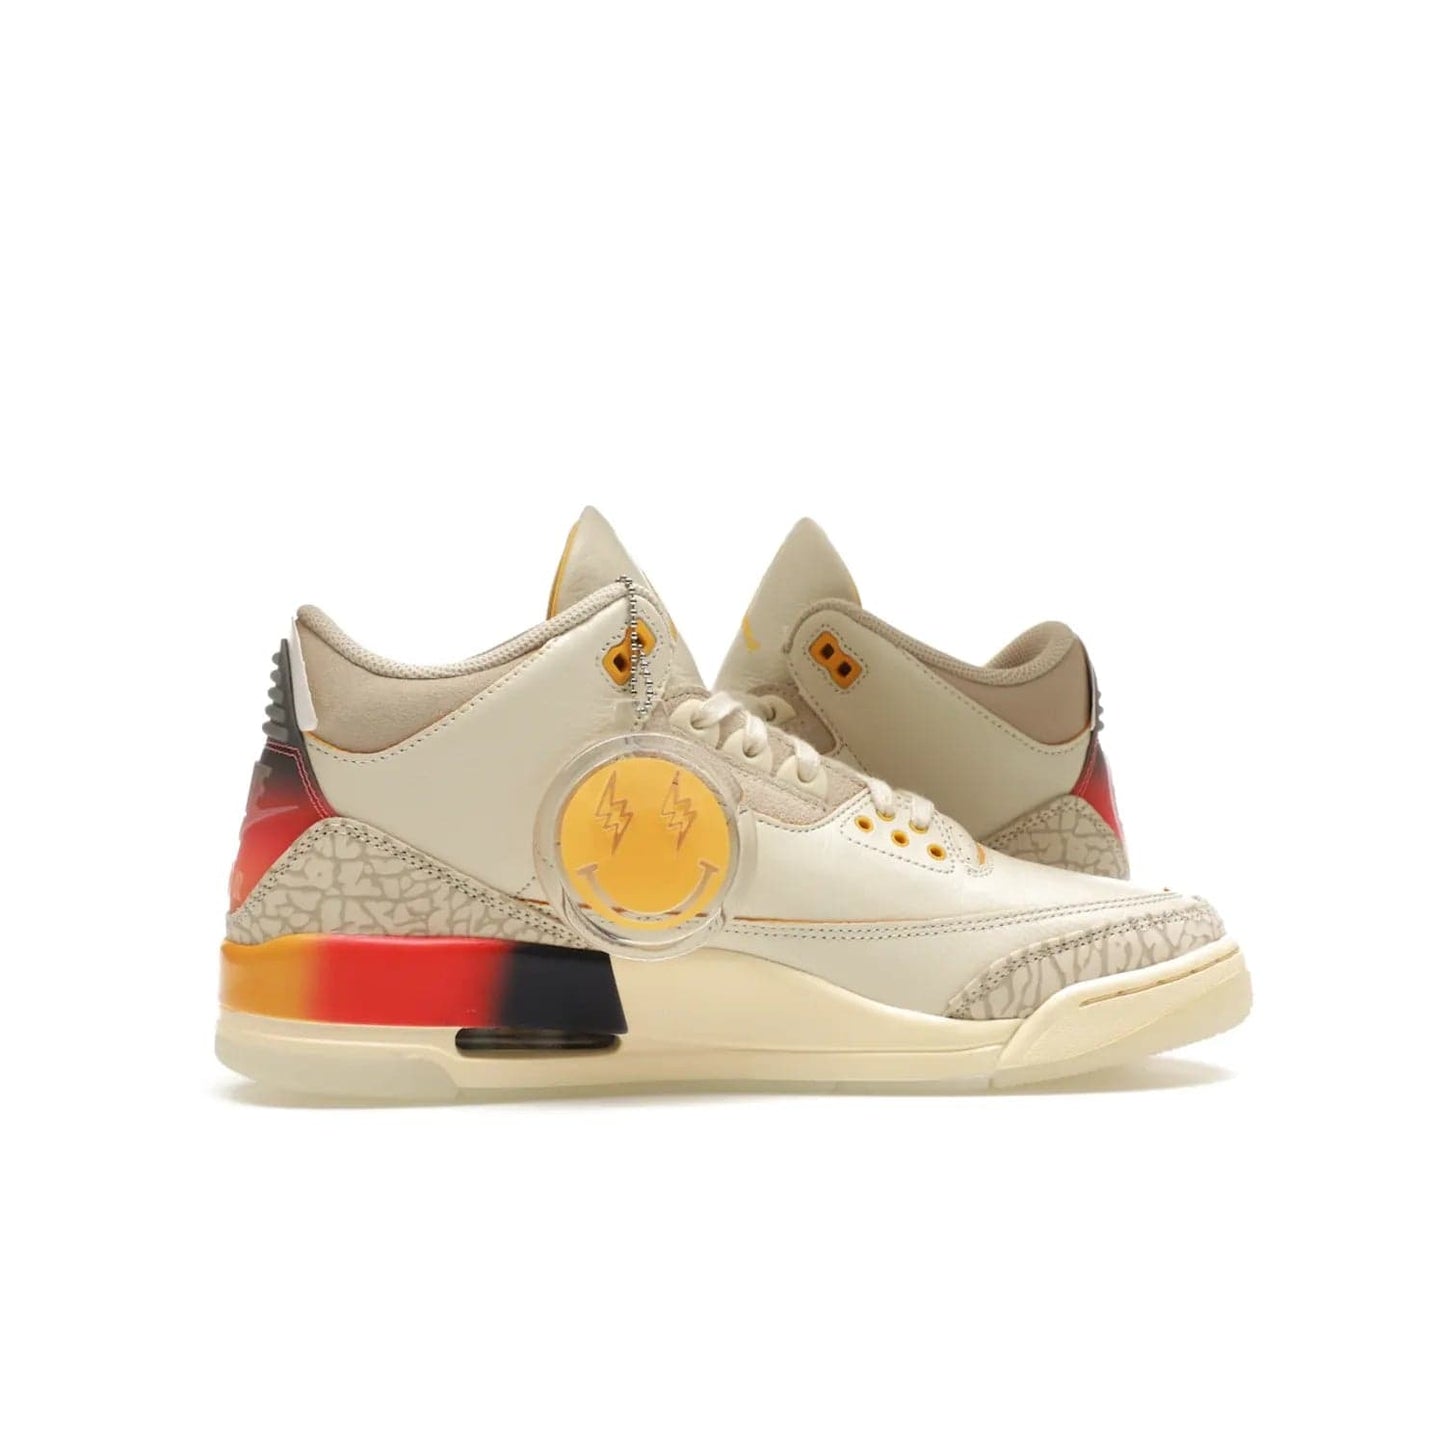 Jordan 3 Retro SP J Balvin Medellín Sunset - Image 18 - Only at www.BallersClubKickz.com - J Balvin x Jordan 3 Retro SP: Celebrate the joy of life with a colorful, homage to the electrifying reggaeton culture and iconic Jordan 3. Limited edition, Sept. 23. $250.